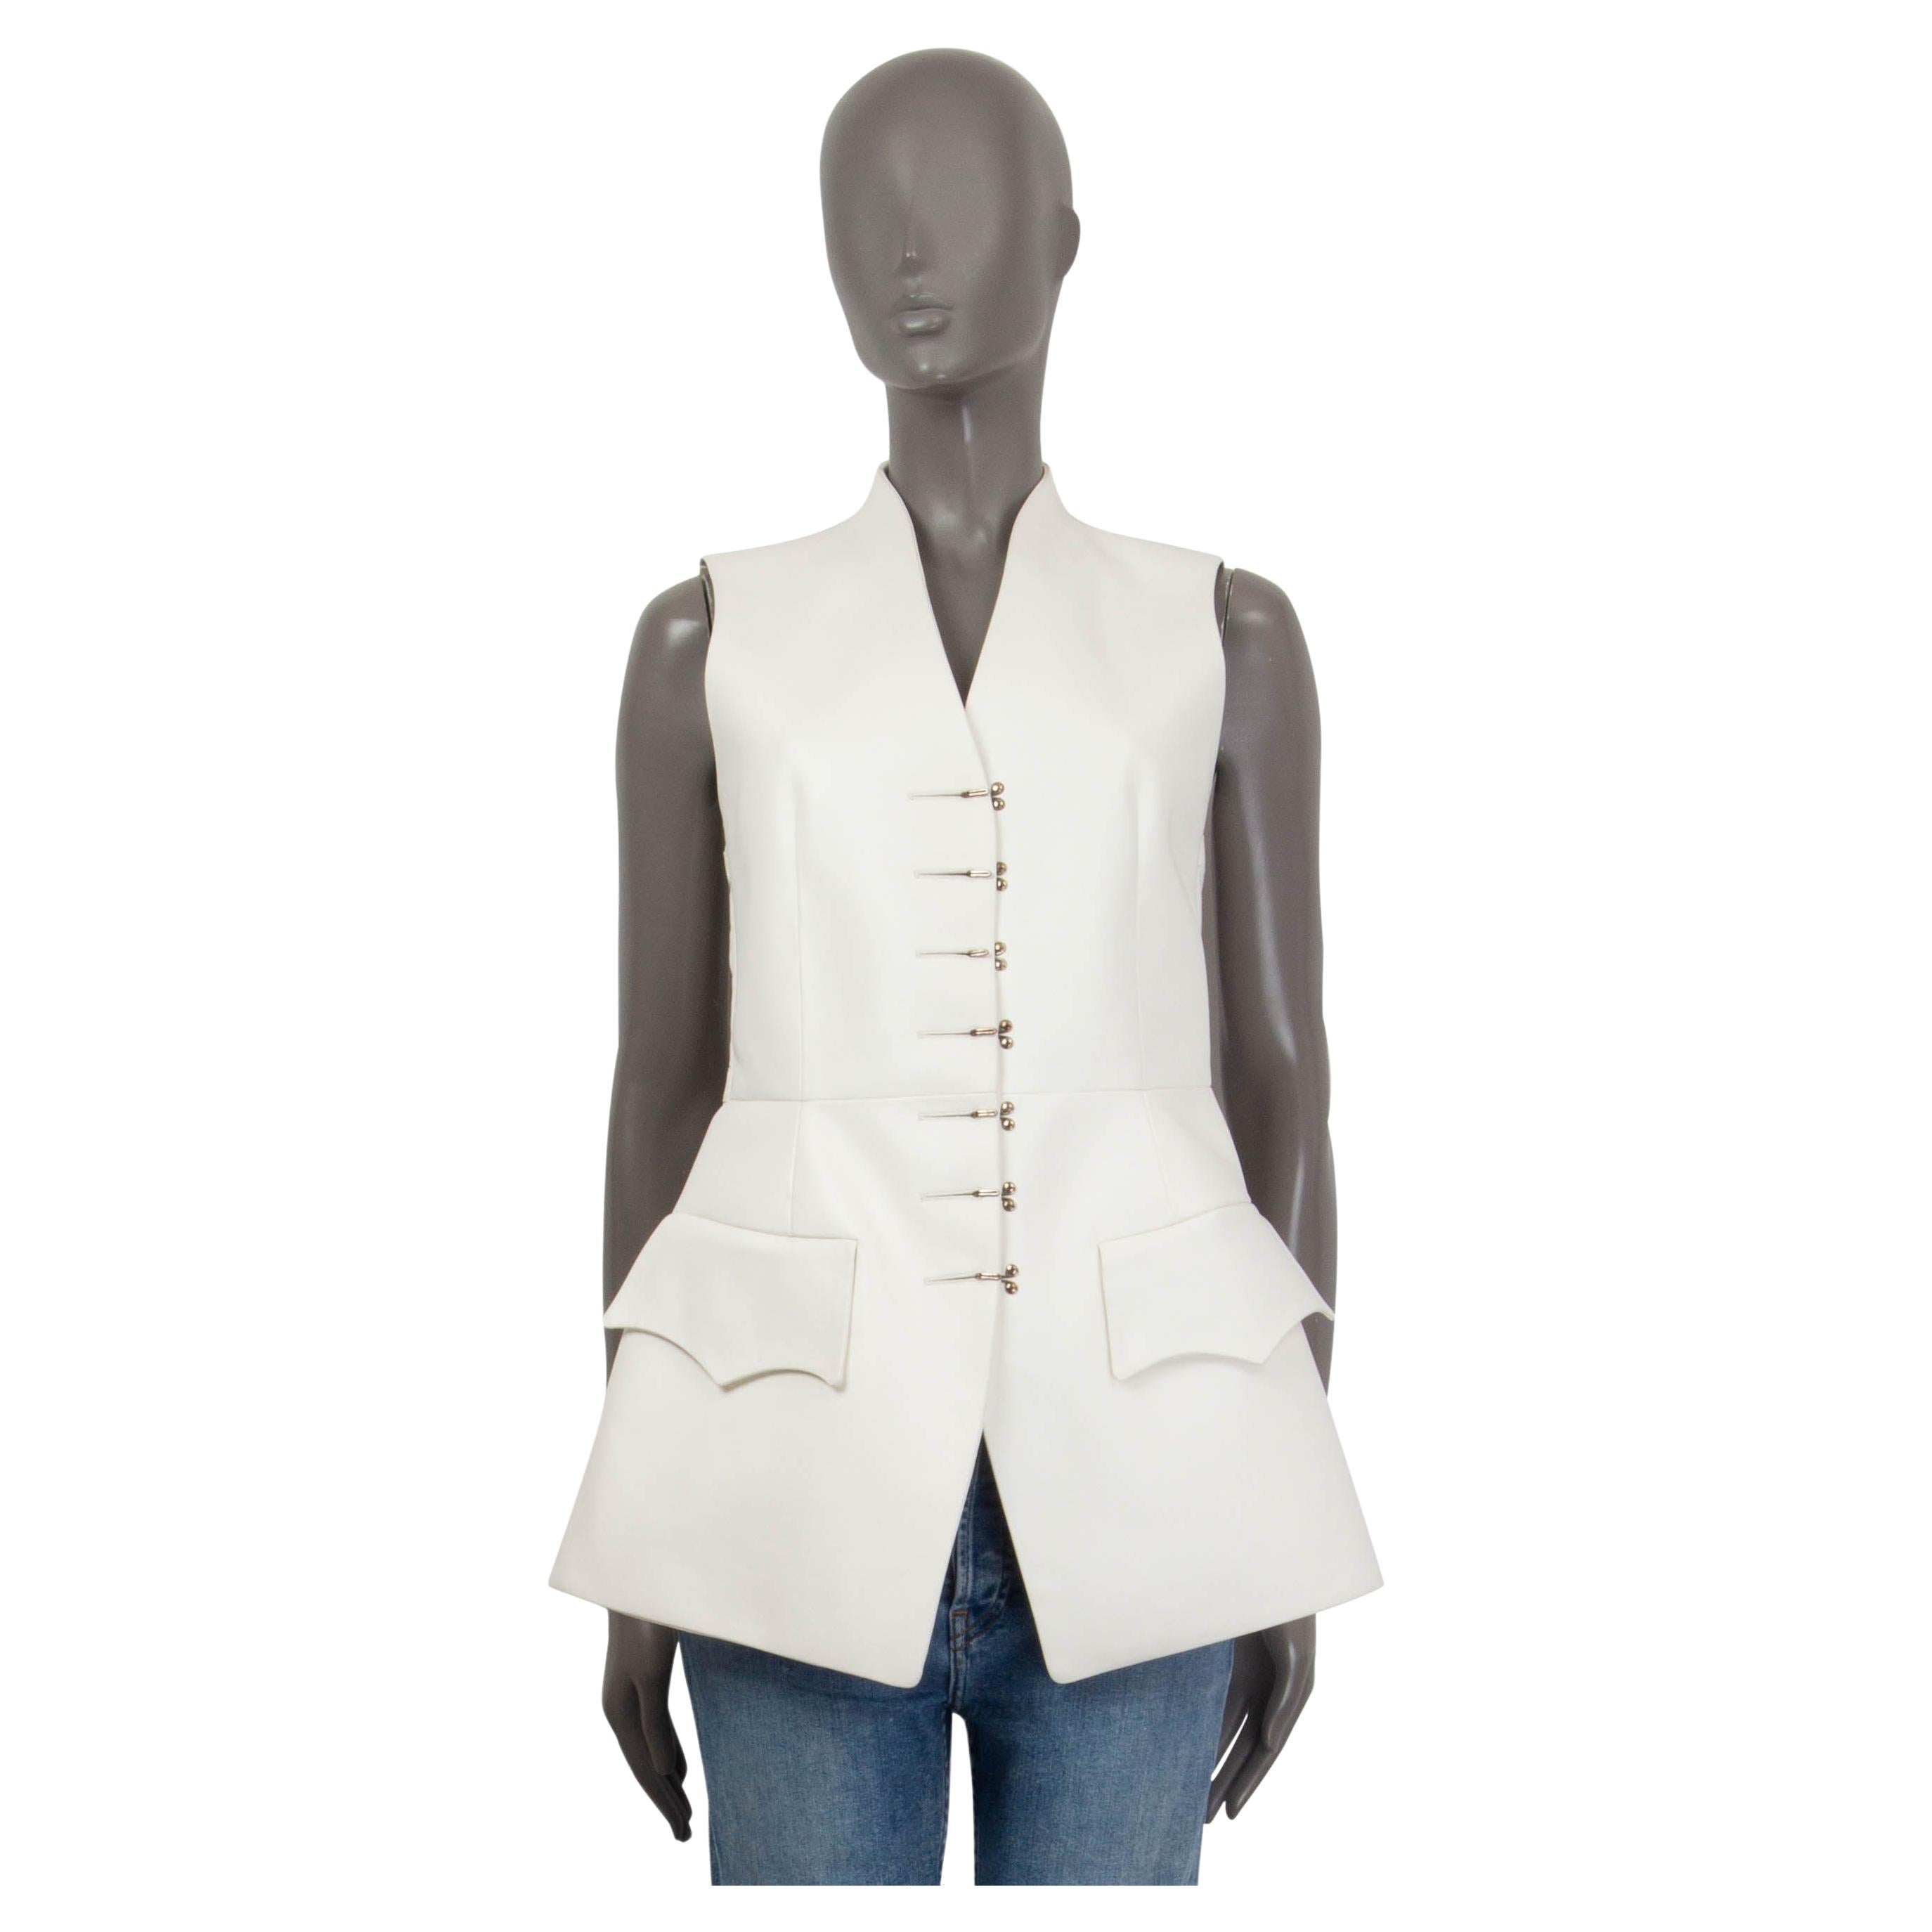 Products By Louis Vuitton: Zipped Rib Gilet With Pocket